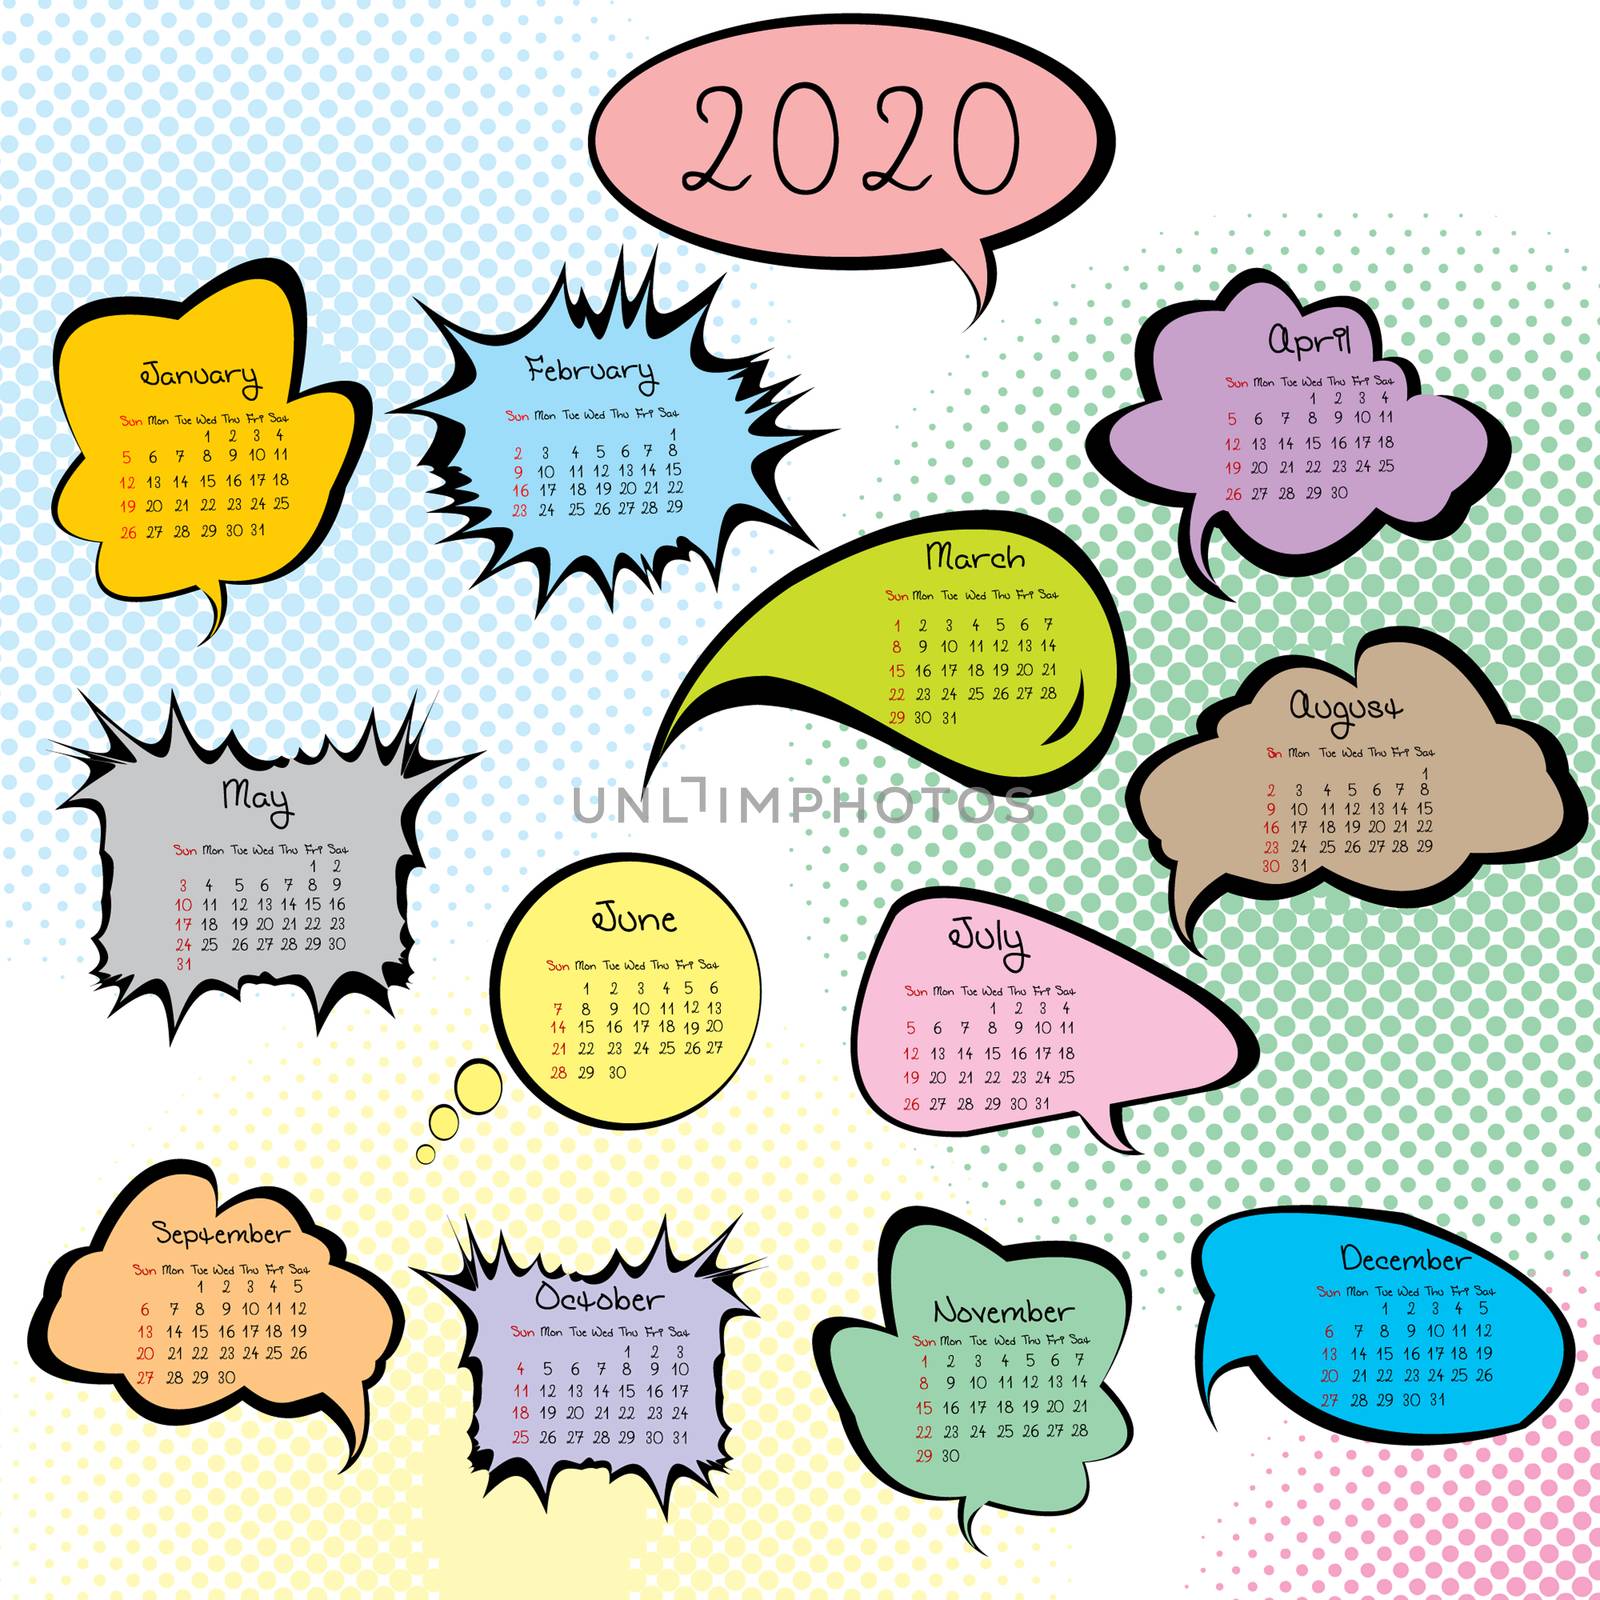 2020 calendar with colored speech bubbles by hibrida13